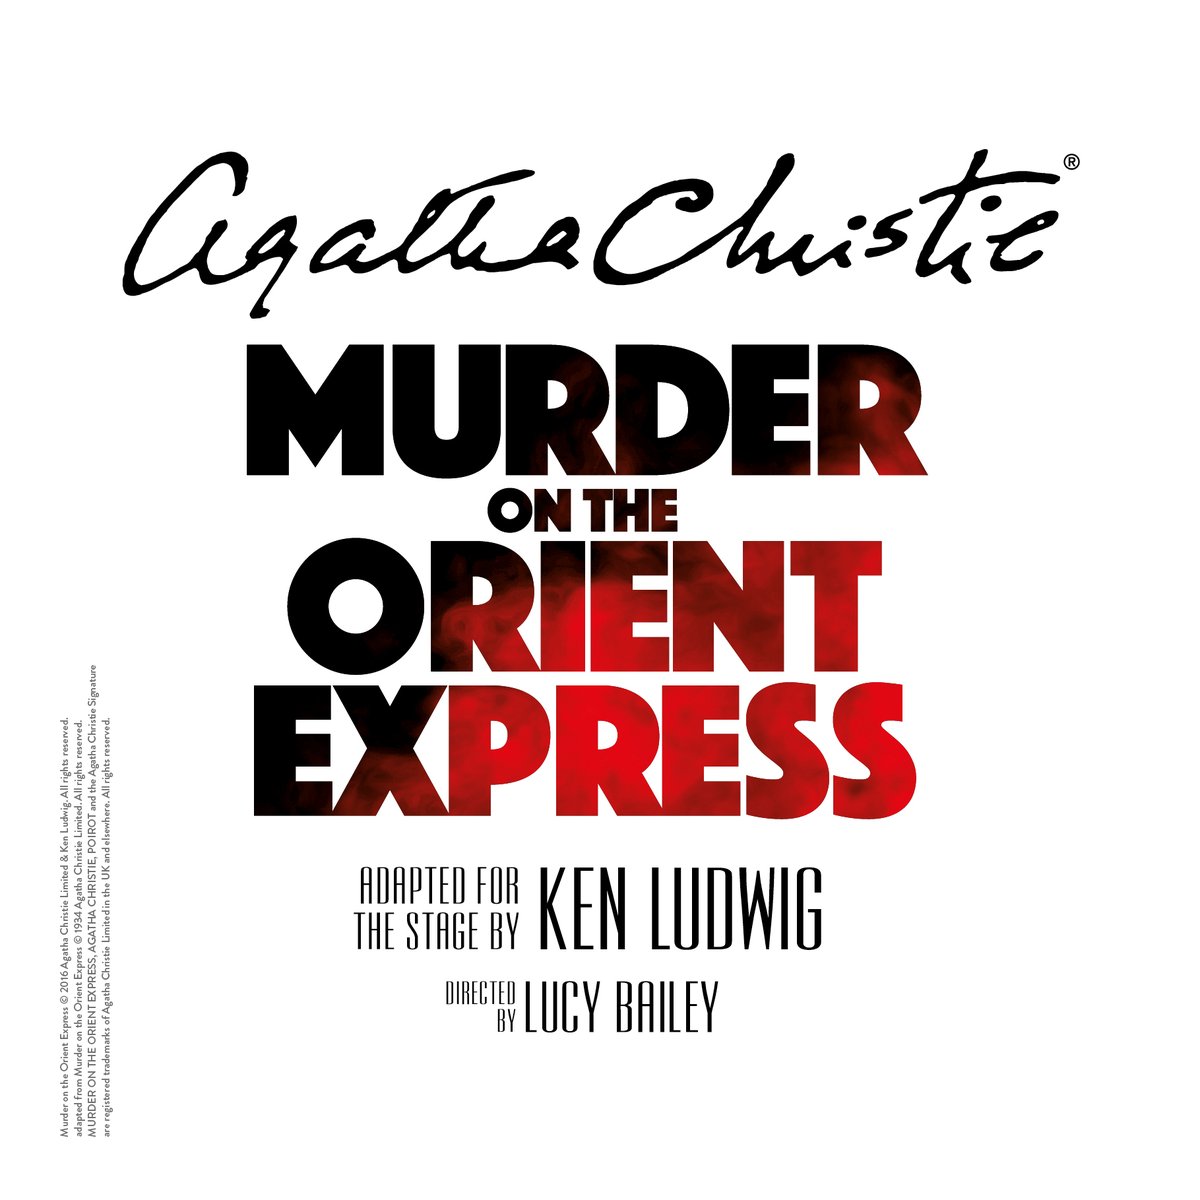 📢New Show Announcement 📢 🚂Agatha Christie’s MURDER ON THE ORIENT EXPRESS 🚂 Adapted for the stage by Ken Ludwig 🗓️Tues 12th to Sat 16th November 🎟️Book Online: bit.ly/49DNoFT ☎️01684 892277 10.30am-8pm Mon to Sat